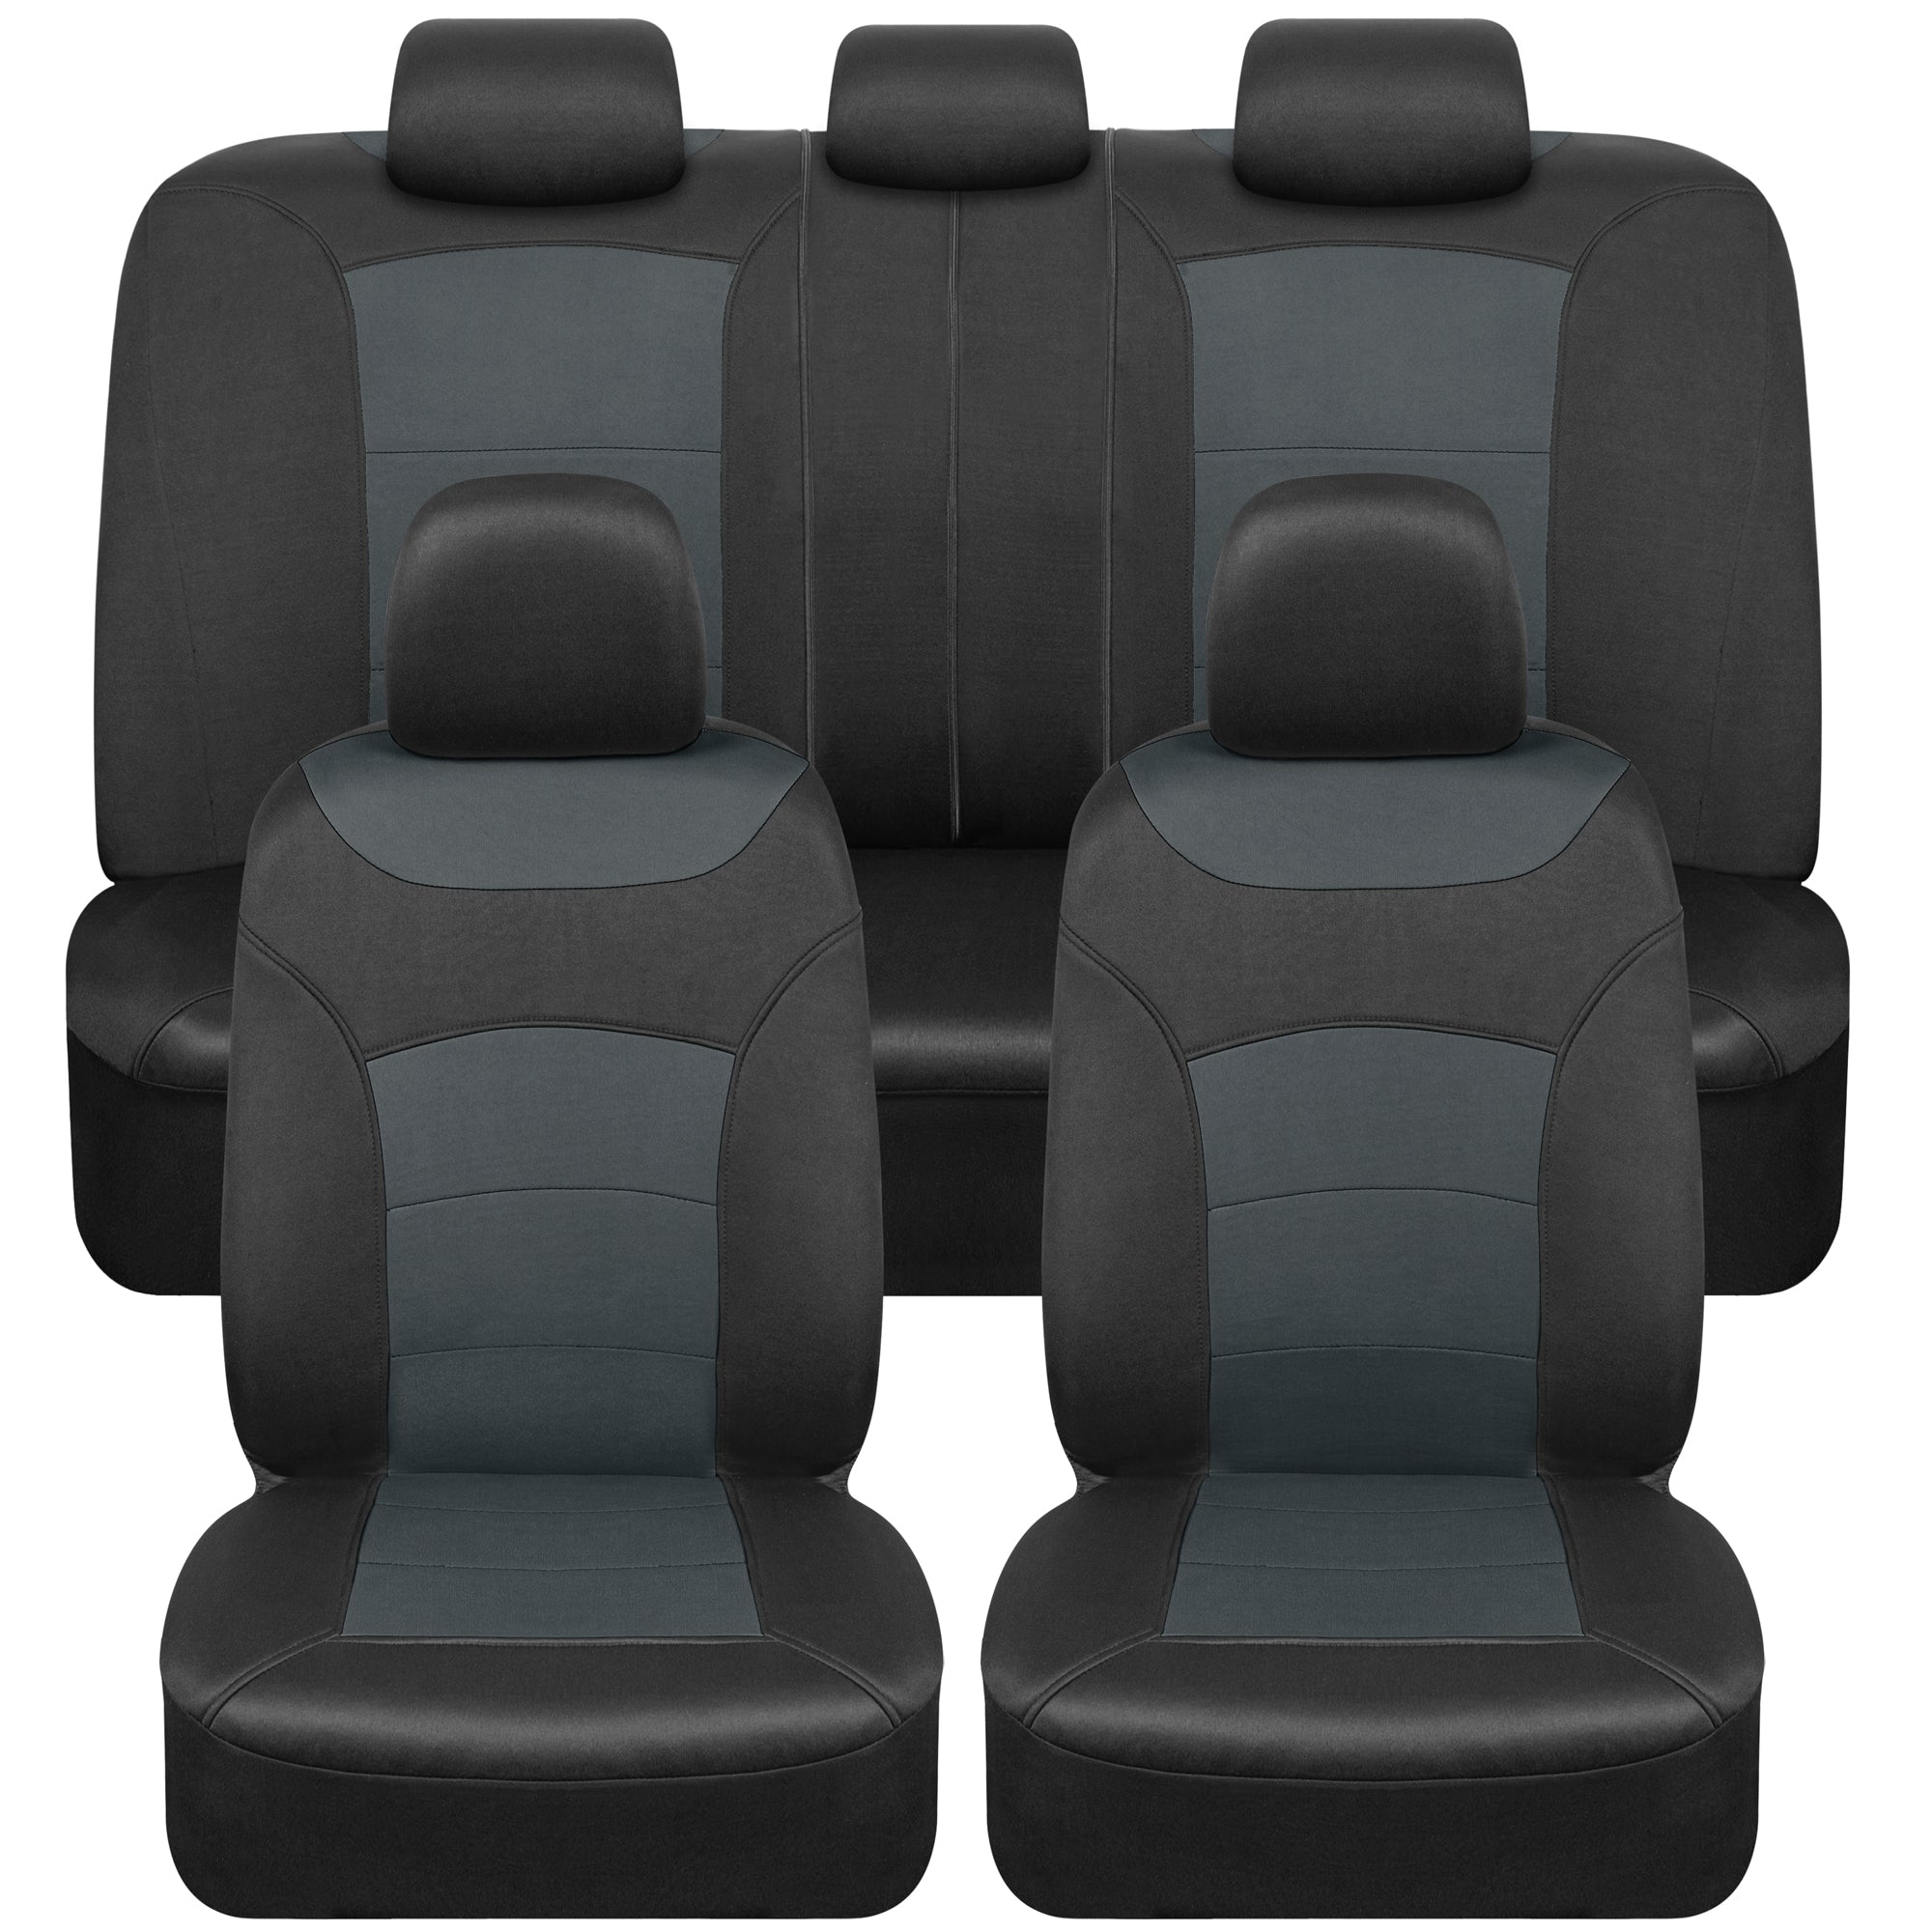 Turismo Car Seat Covers Full Set, Two-Tone Front Seat Covers for Cars with Split Rear Bench Back Seat Cover